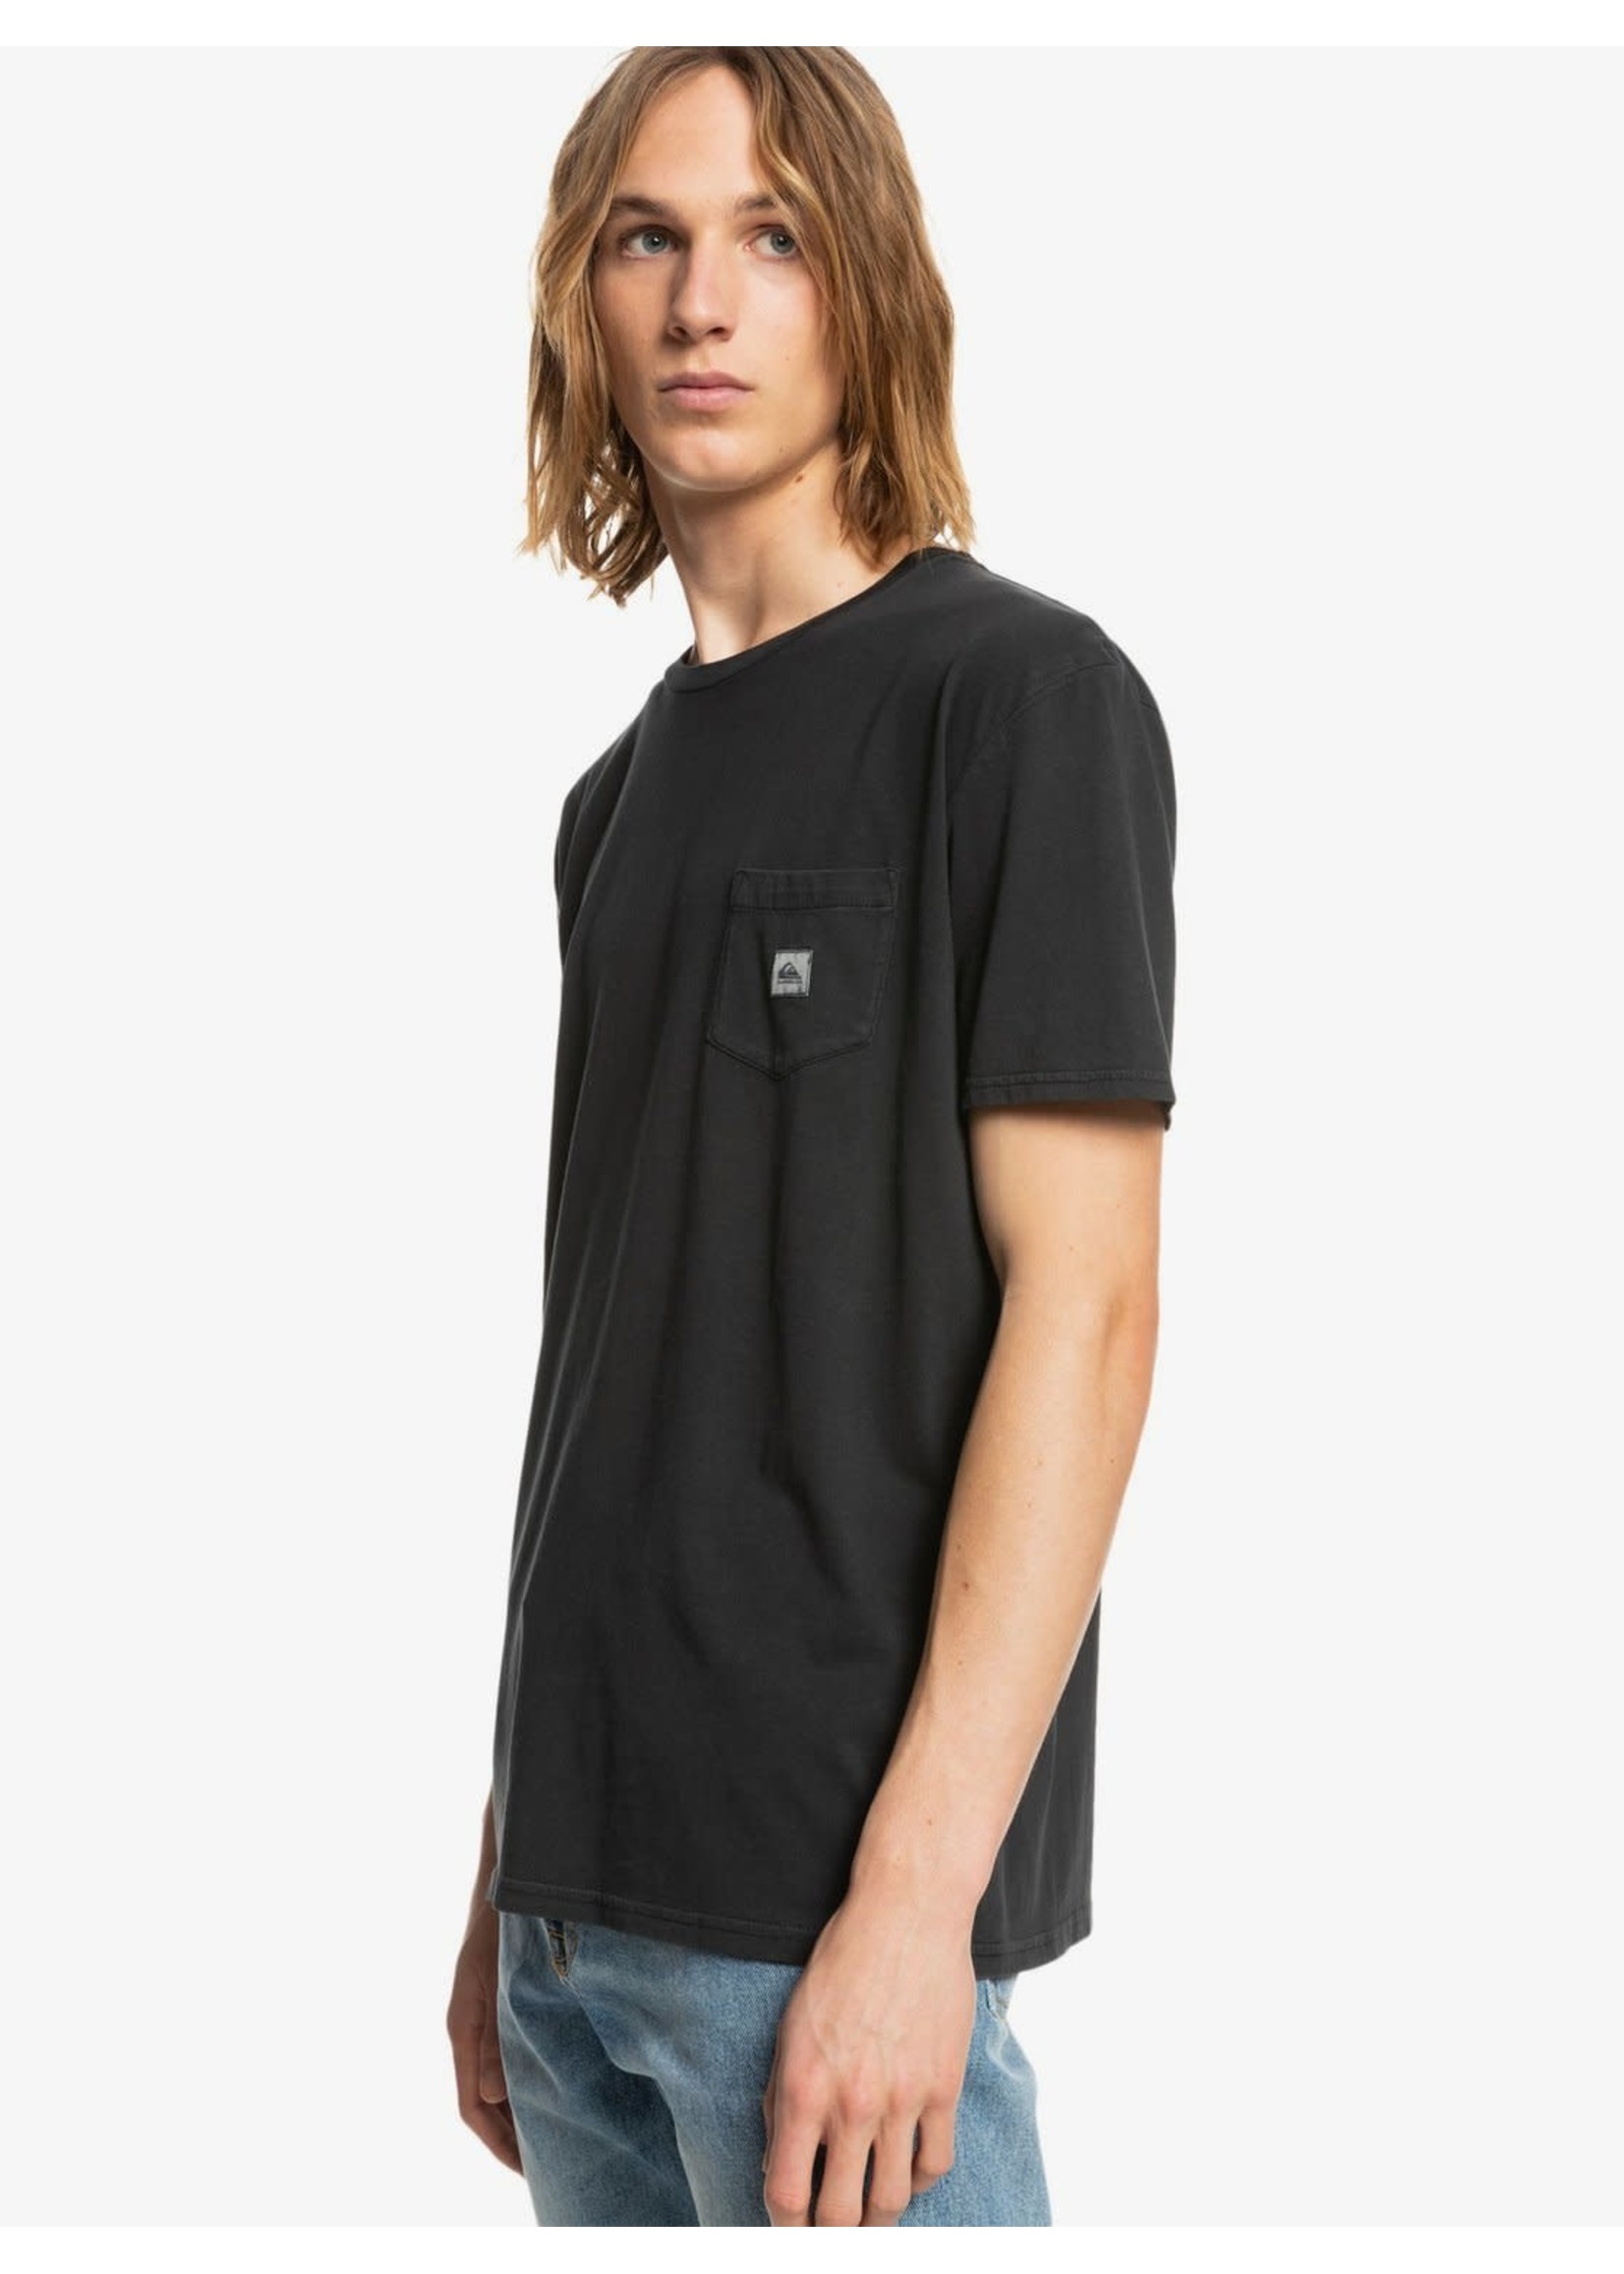 QUIKSILVER T-shirt SUBMISSIONS